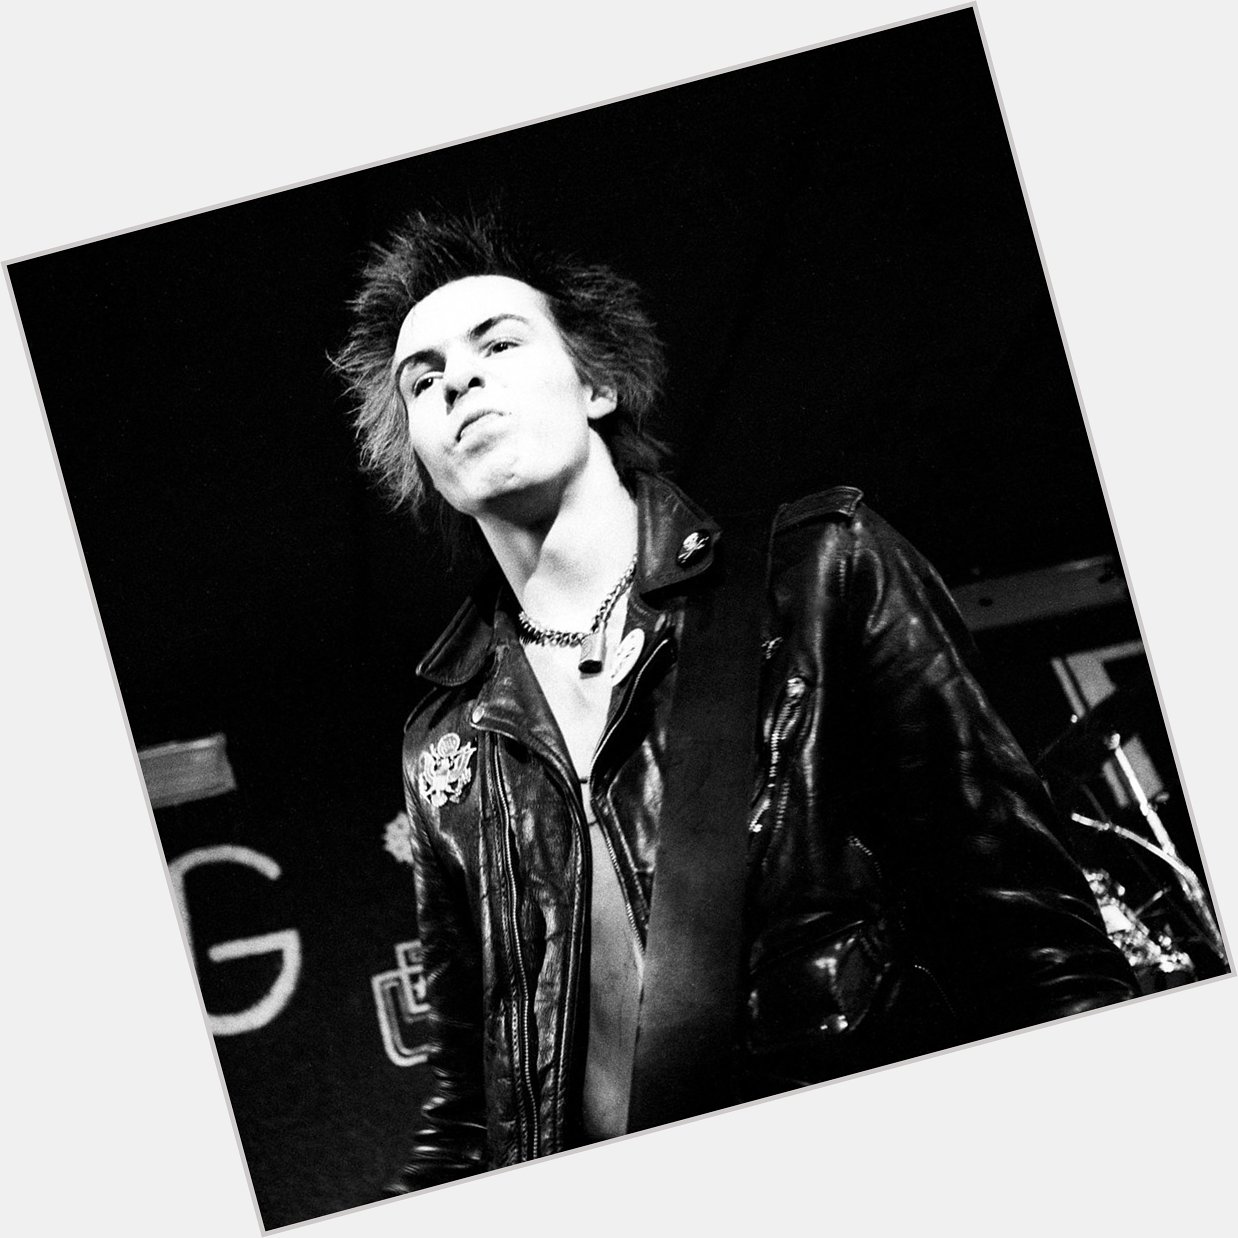 Happy Birthday Sid Vicious, bassist and vocalist of the Sex Pistols. He would have been 61 today. 